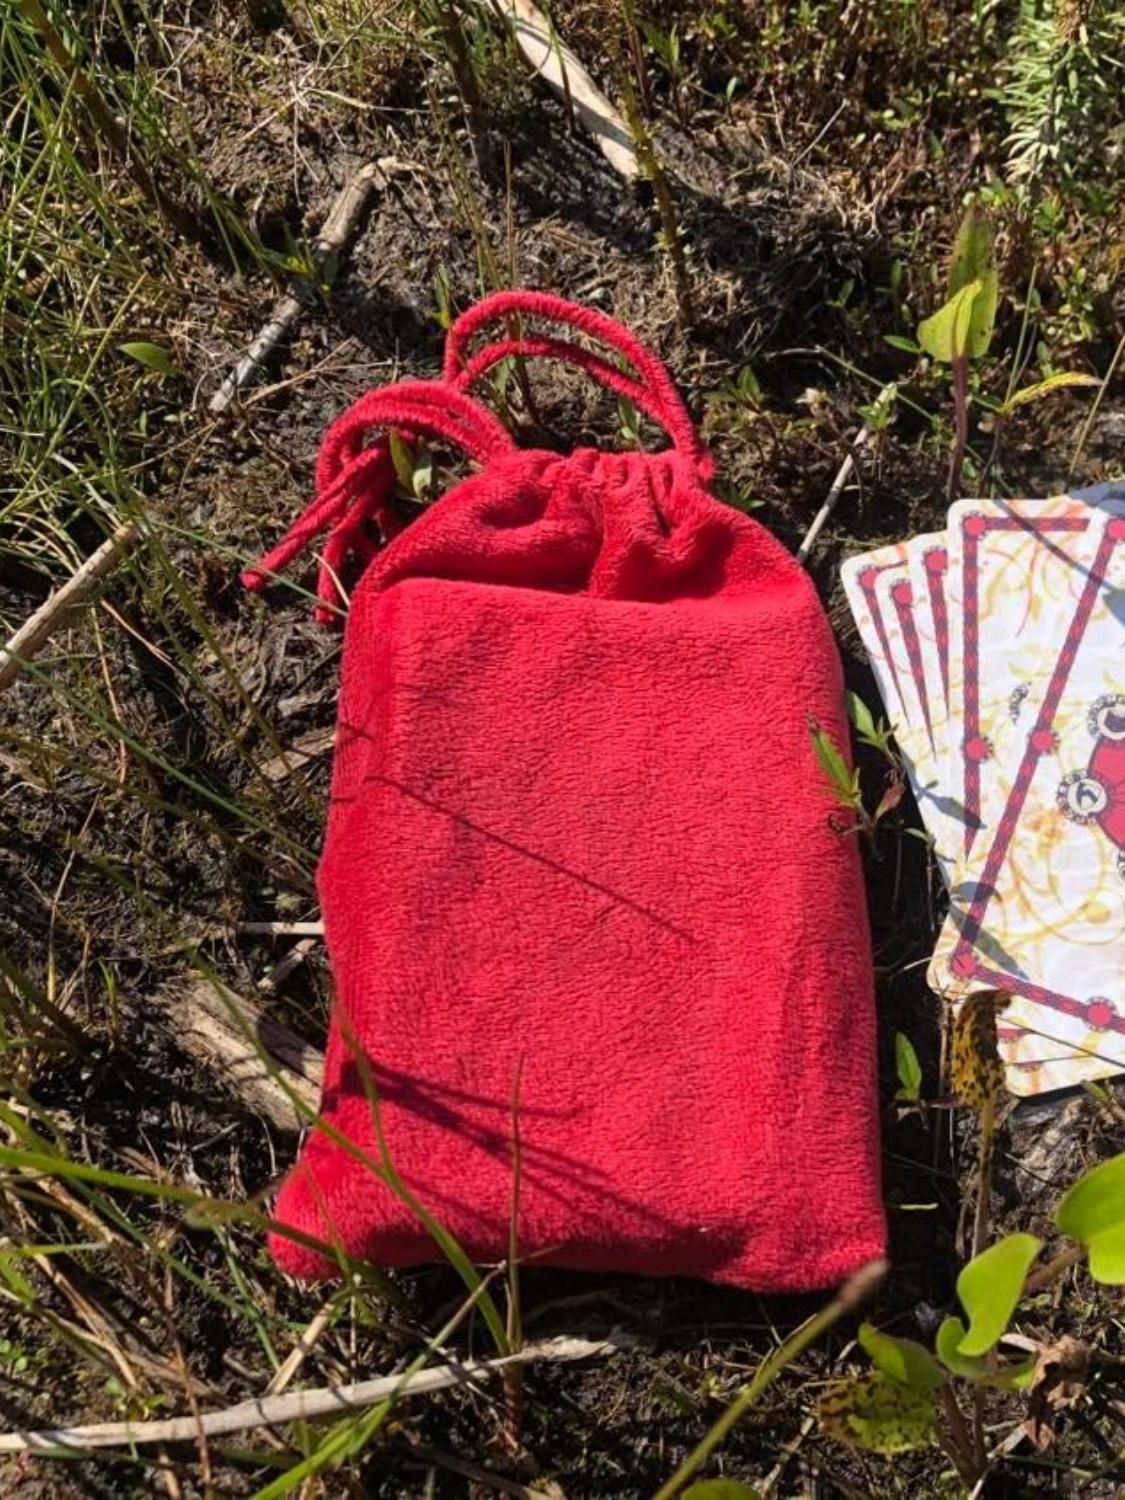 The red velvet-like bag created for the harrow cards, sitting on the ground.